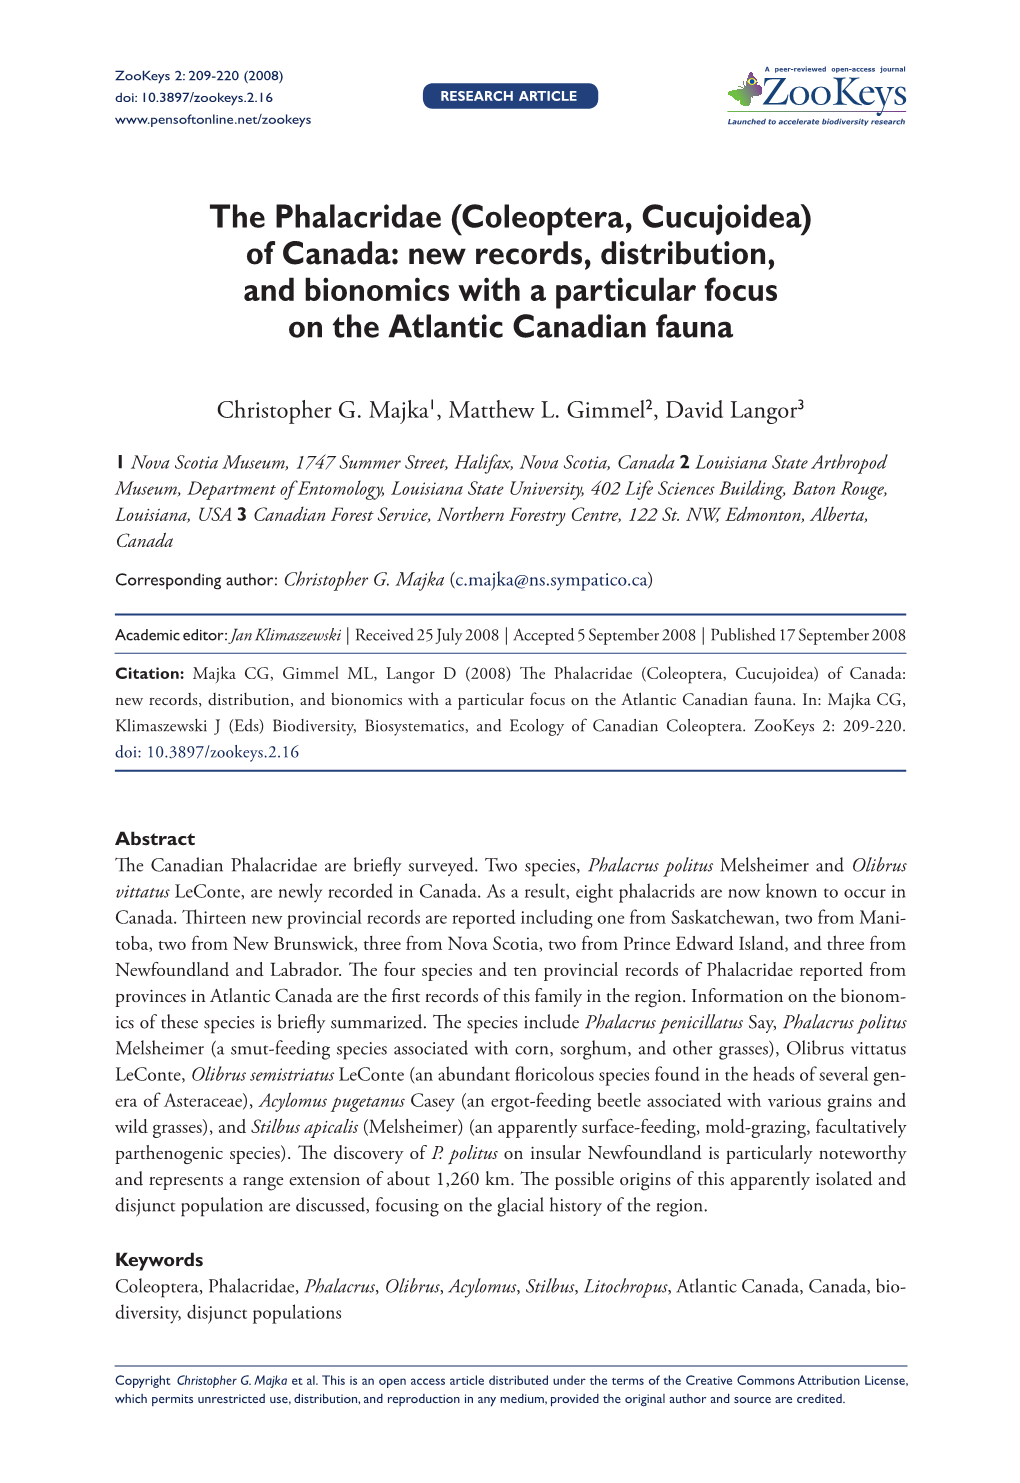 The Phalacridae (Coleoptera, Cucujoidea) of Canada: New Records, Distribution, and Bionomics with a Particular Focus on the Atlantic Canadian Fauna